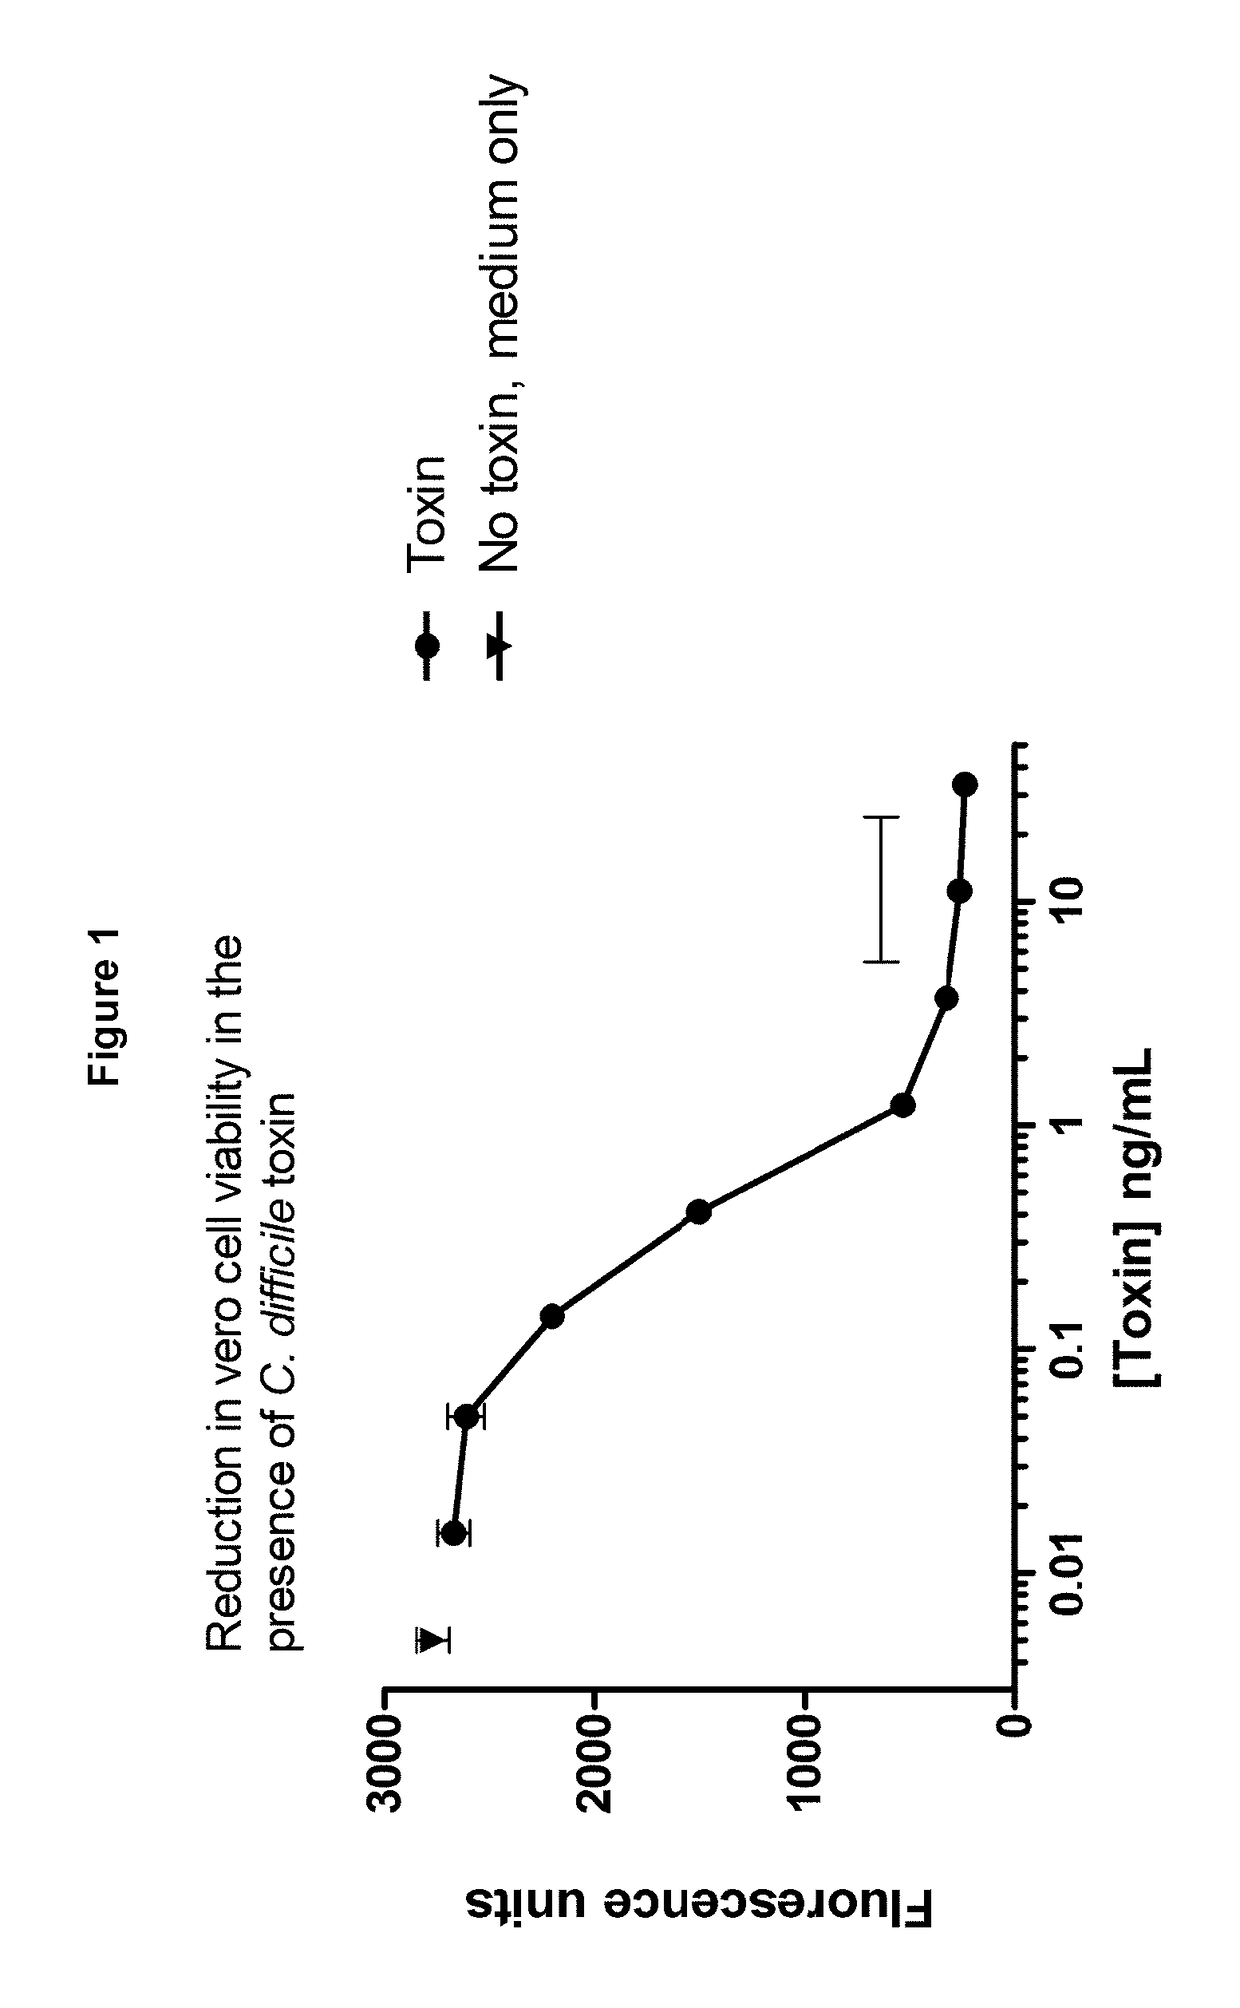 Polypeptide comprising an immunoglobulin chain variable domain which binds to clostridium difficile toxin b